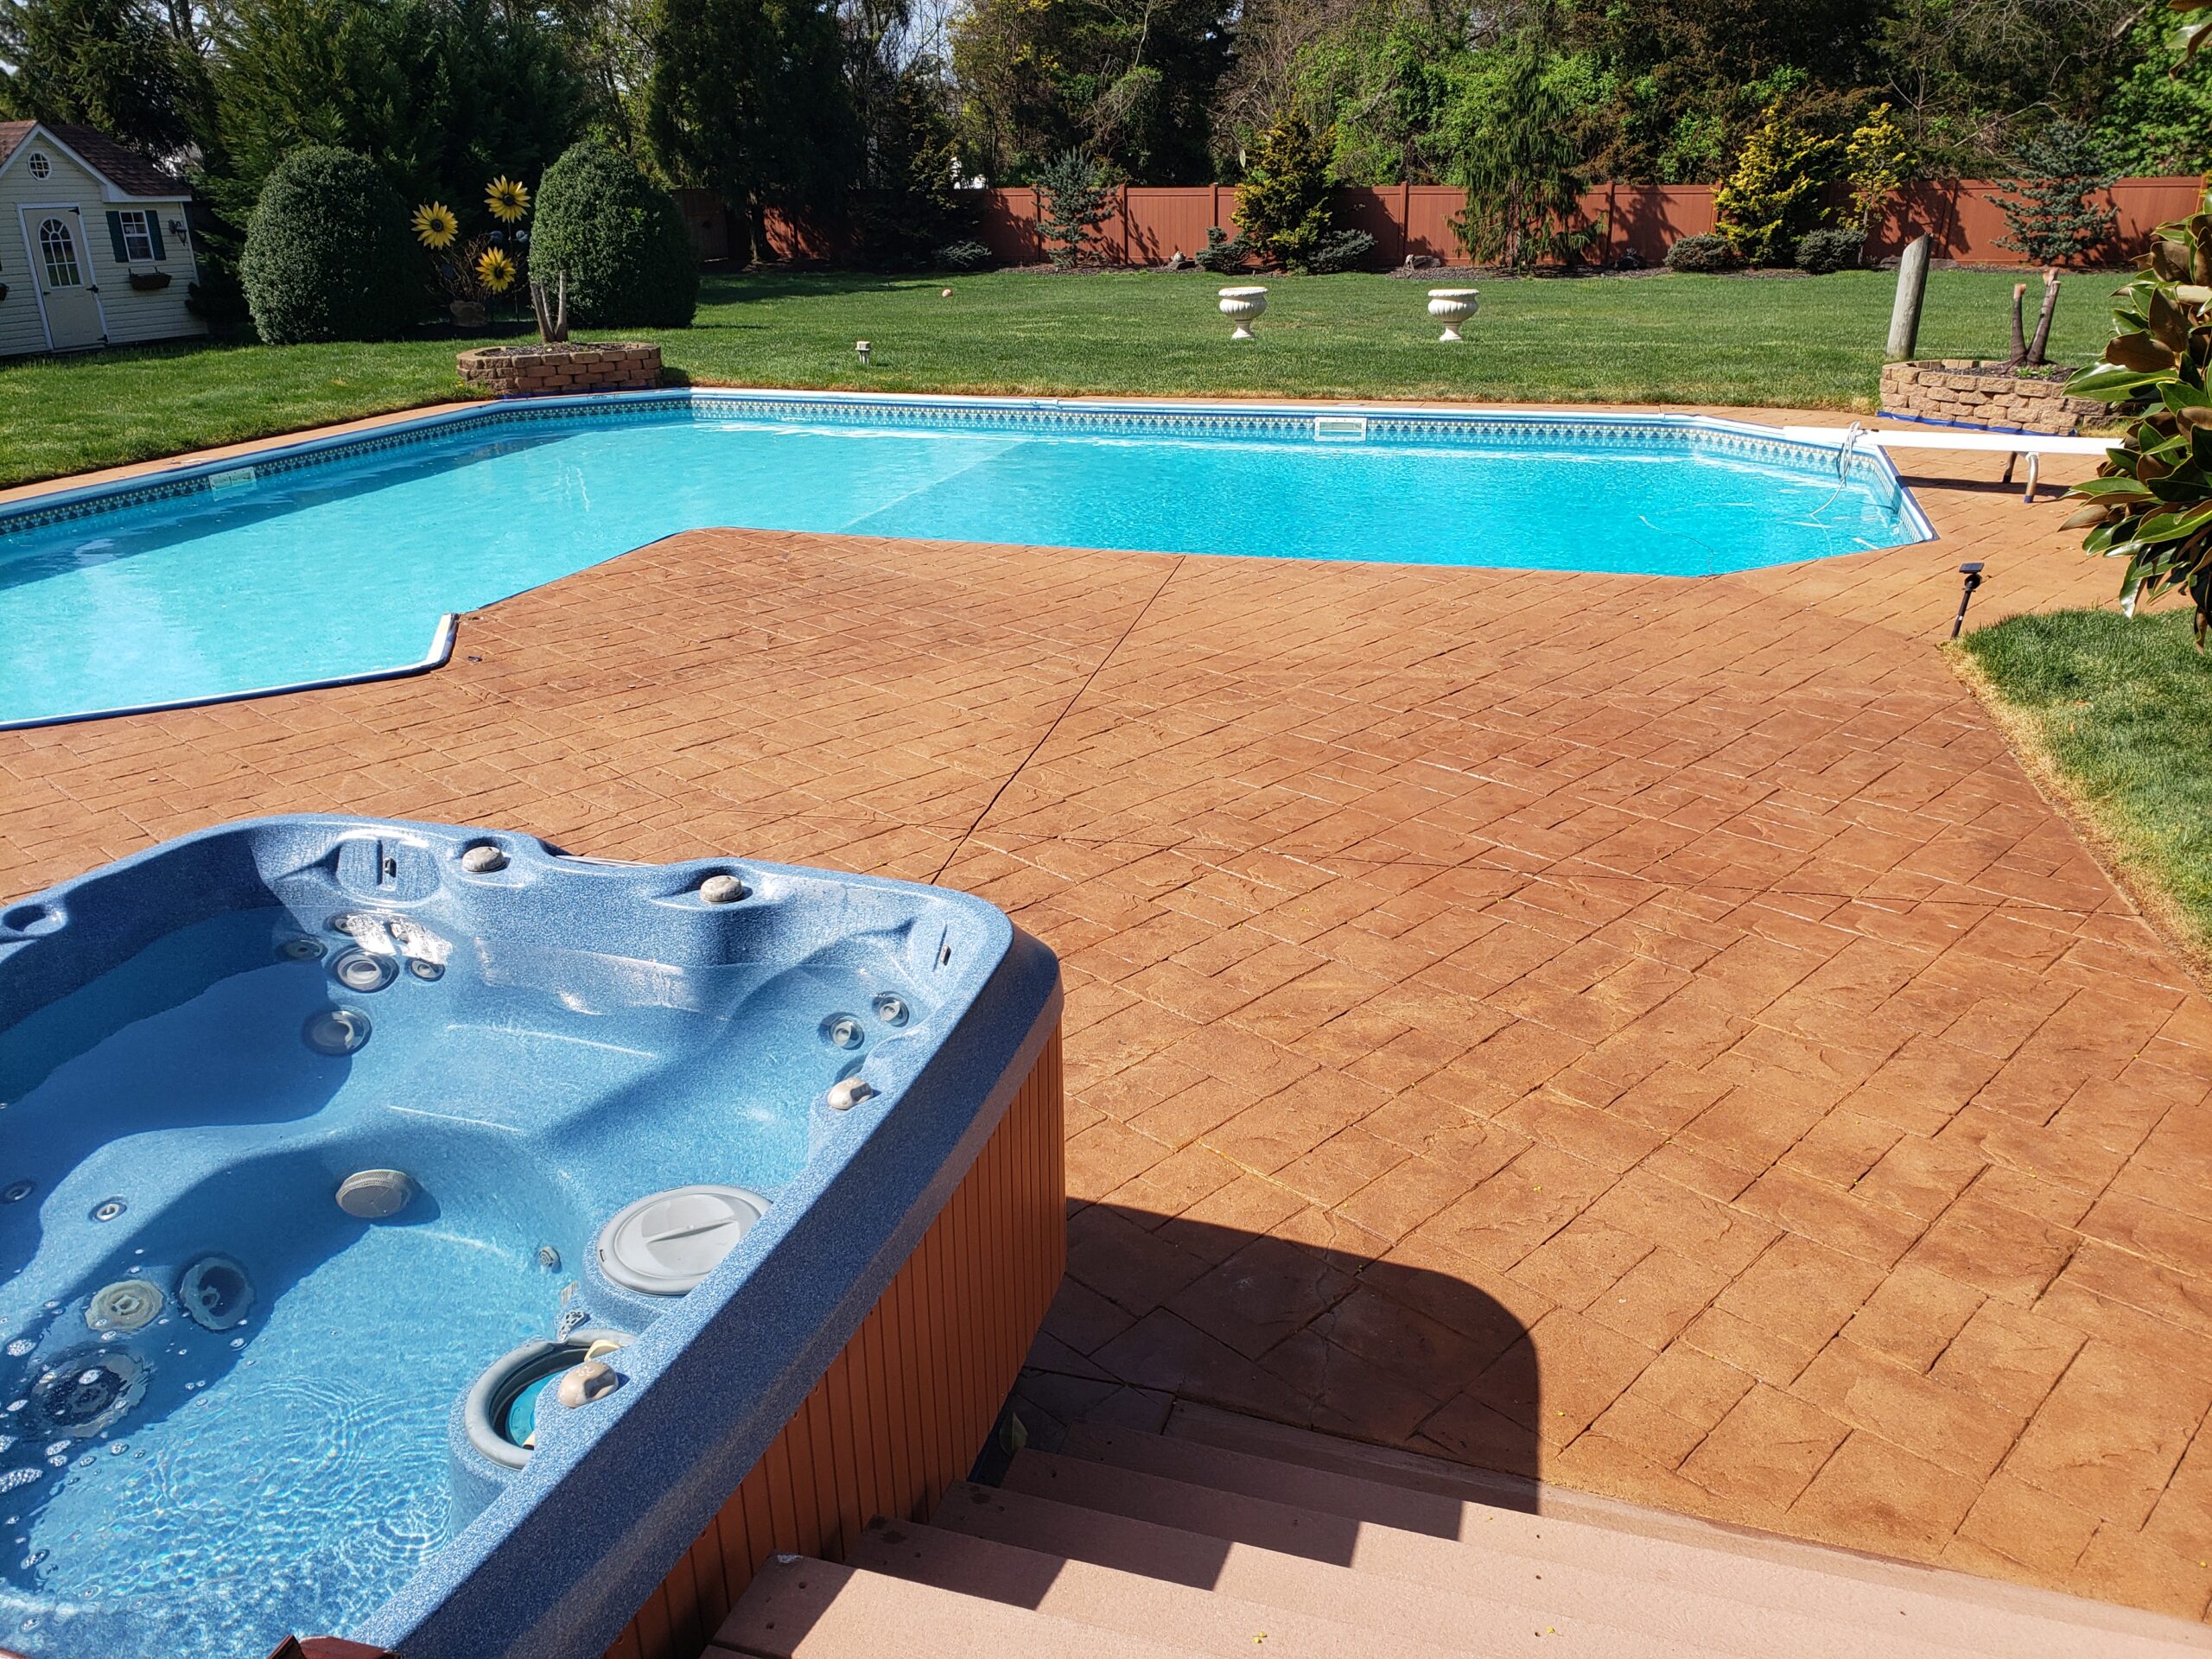 Post-transformation photo of the stamped concrete pool deck, now revitalized with Cumin Antiquing Stain and Satin EasySeal